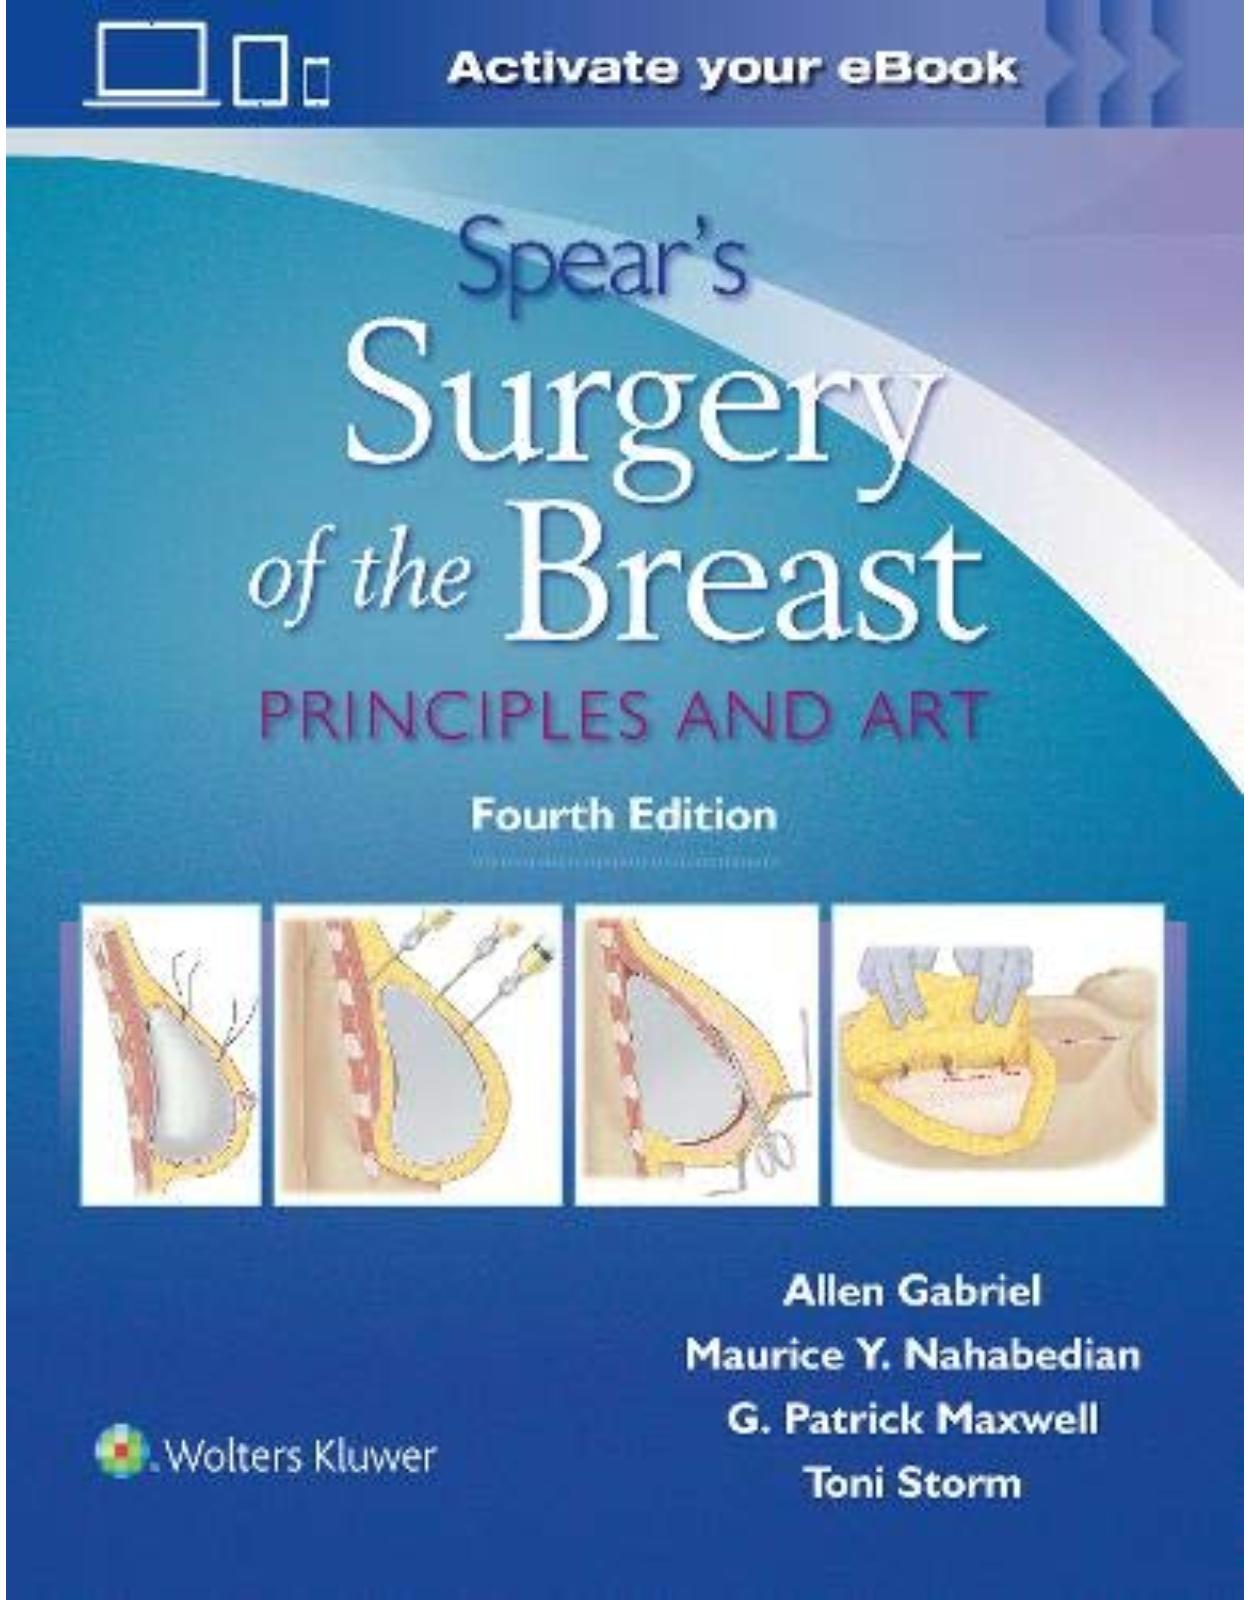 Spear’s Surgery of the Breast Principles and Art, Fourth edition